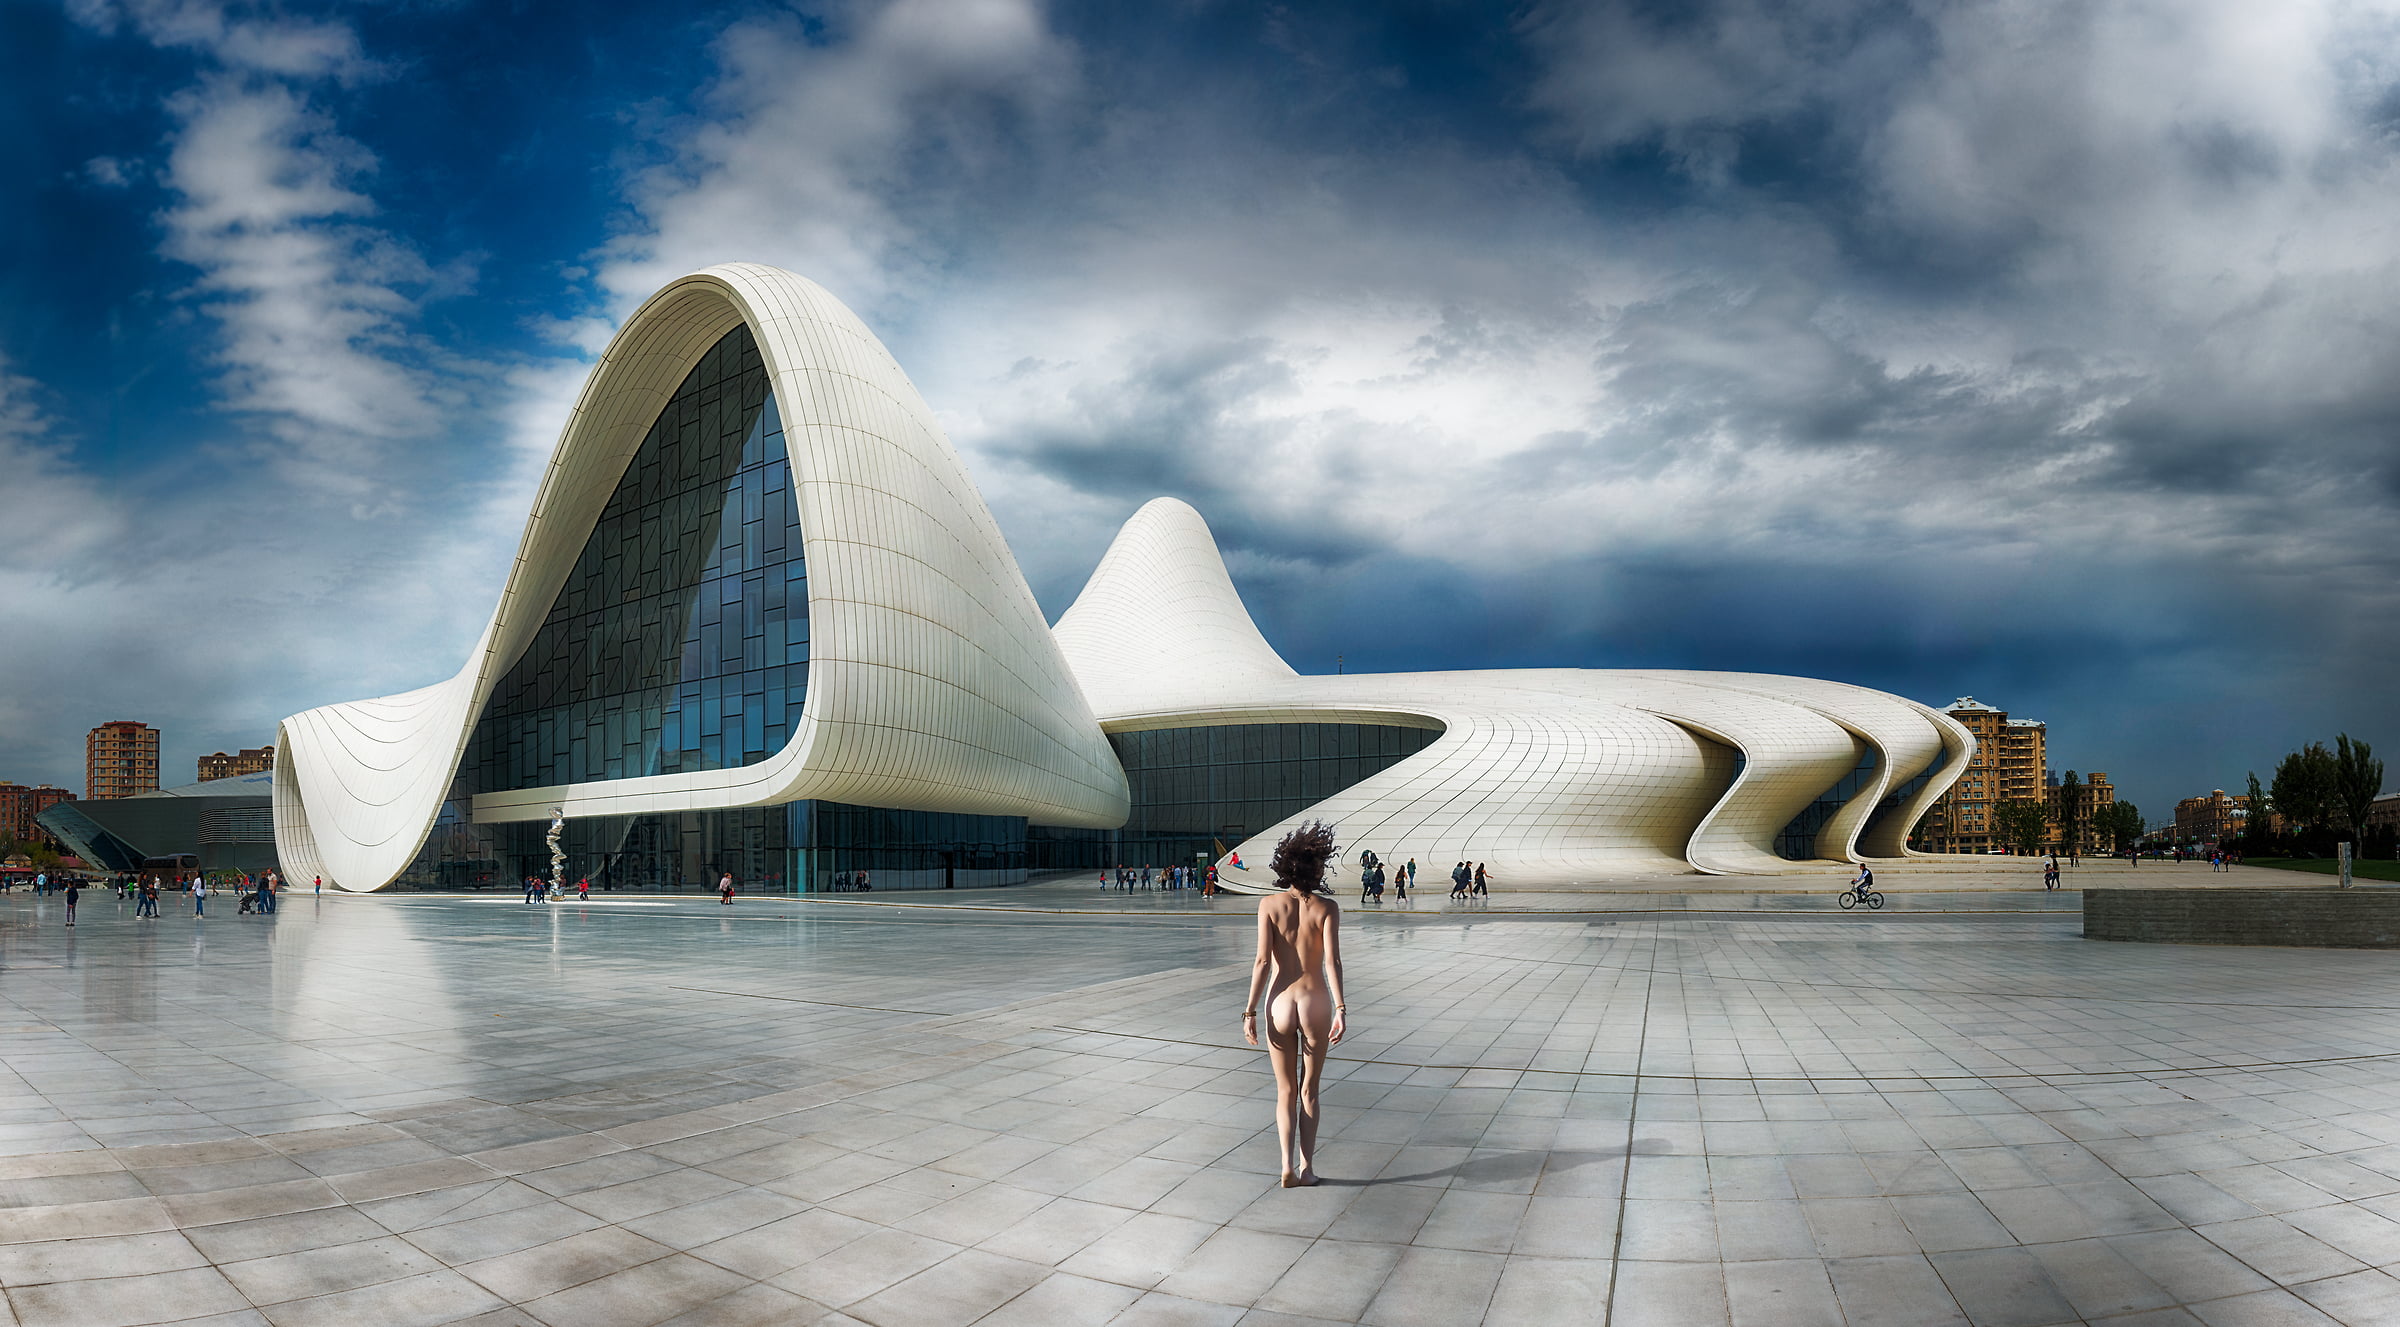 159 megapixels! A very high resolution, large-format VAST photo print of a nude woman in a plaza in front of a modern building; surreal nude photograph created by Peter Rodger in Heydar Aliyev Center, Baku, Azerbaijan